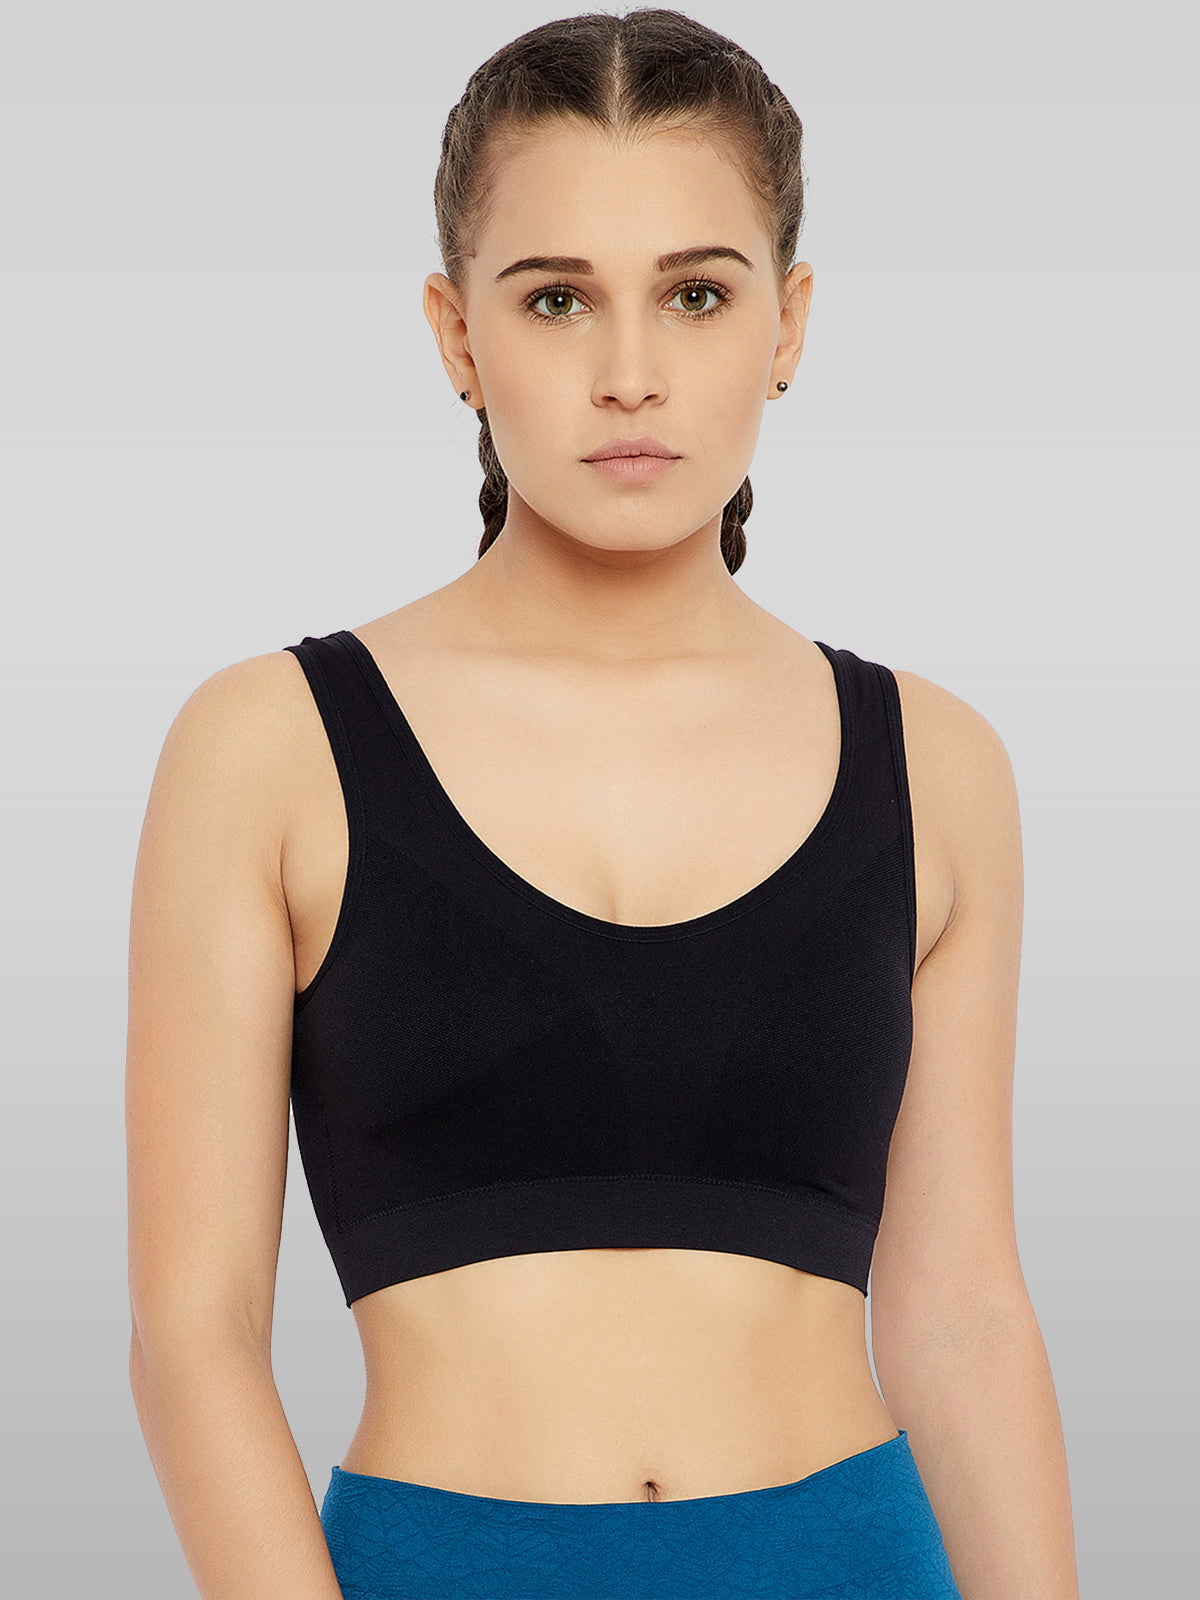 Padded Bras for Enhanced Comfort and Support – C9 Airwear